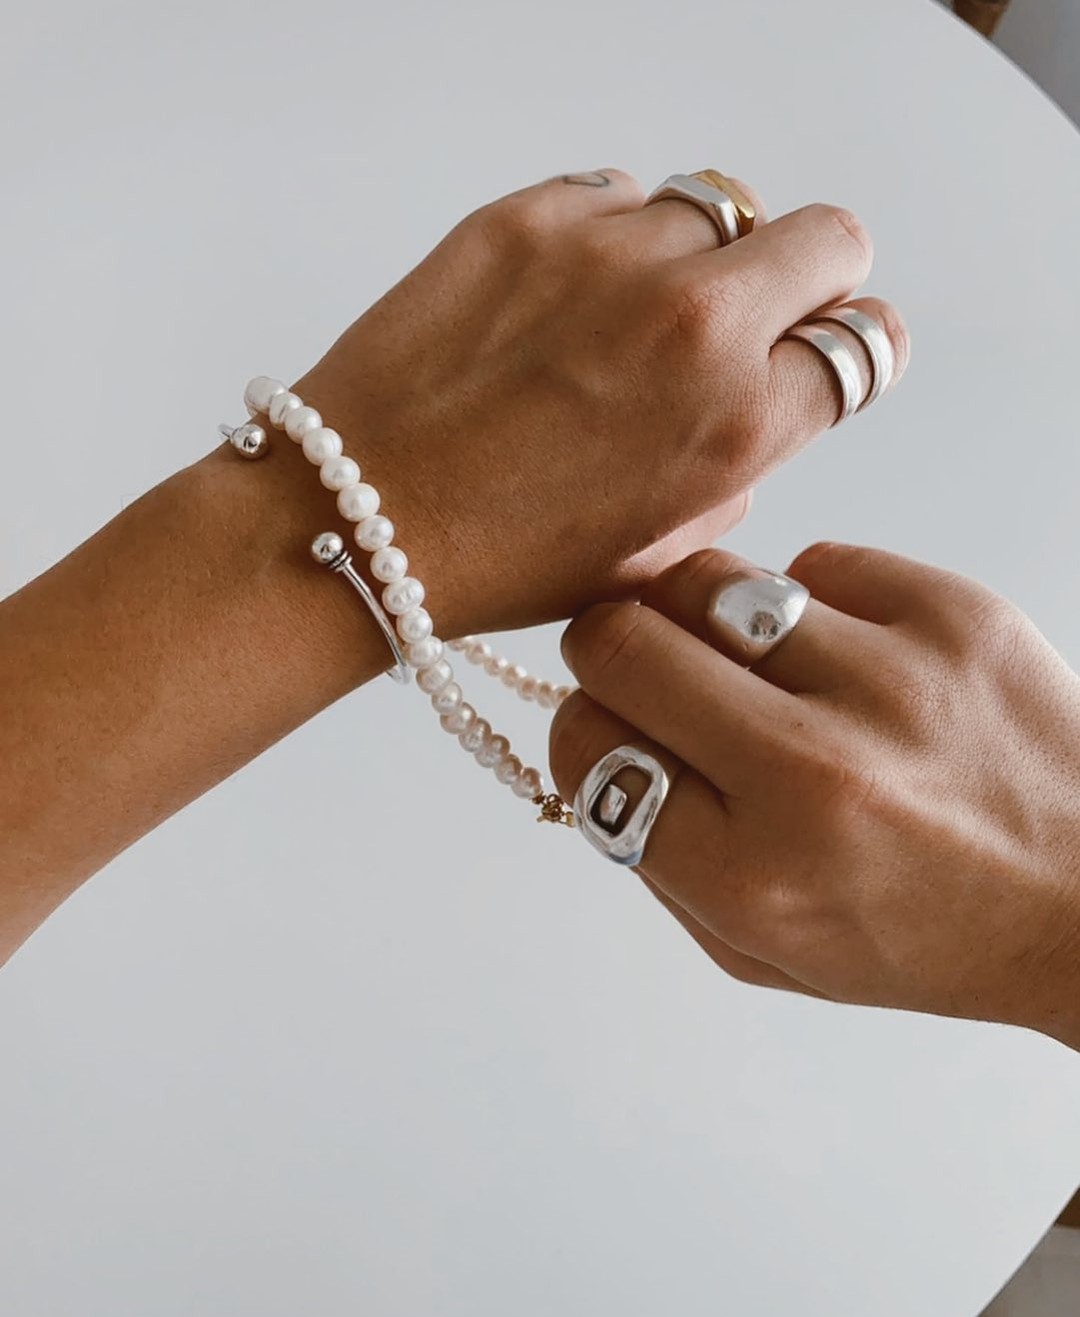 There is no better way to show your "brave and bold" than wearing the right jewelry! State your super woman power with bold, silver rings and embrace the girl inside you with pearls! #Nbrosjewels loves women ❤